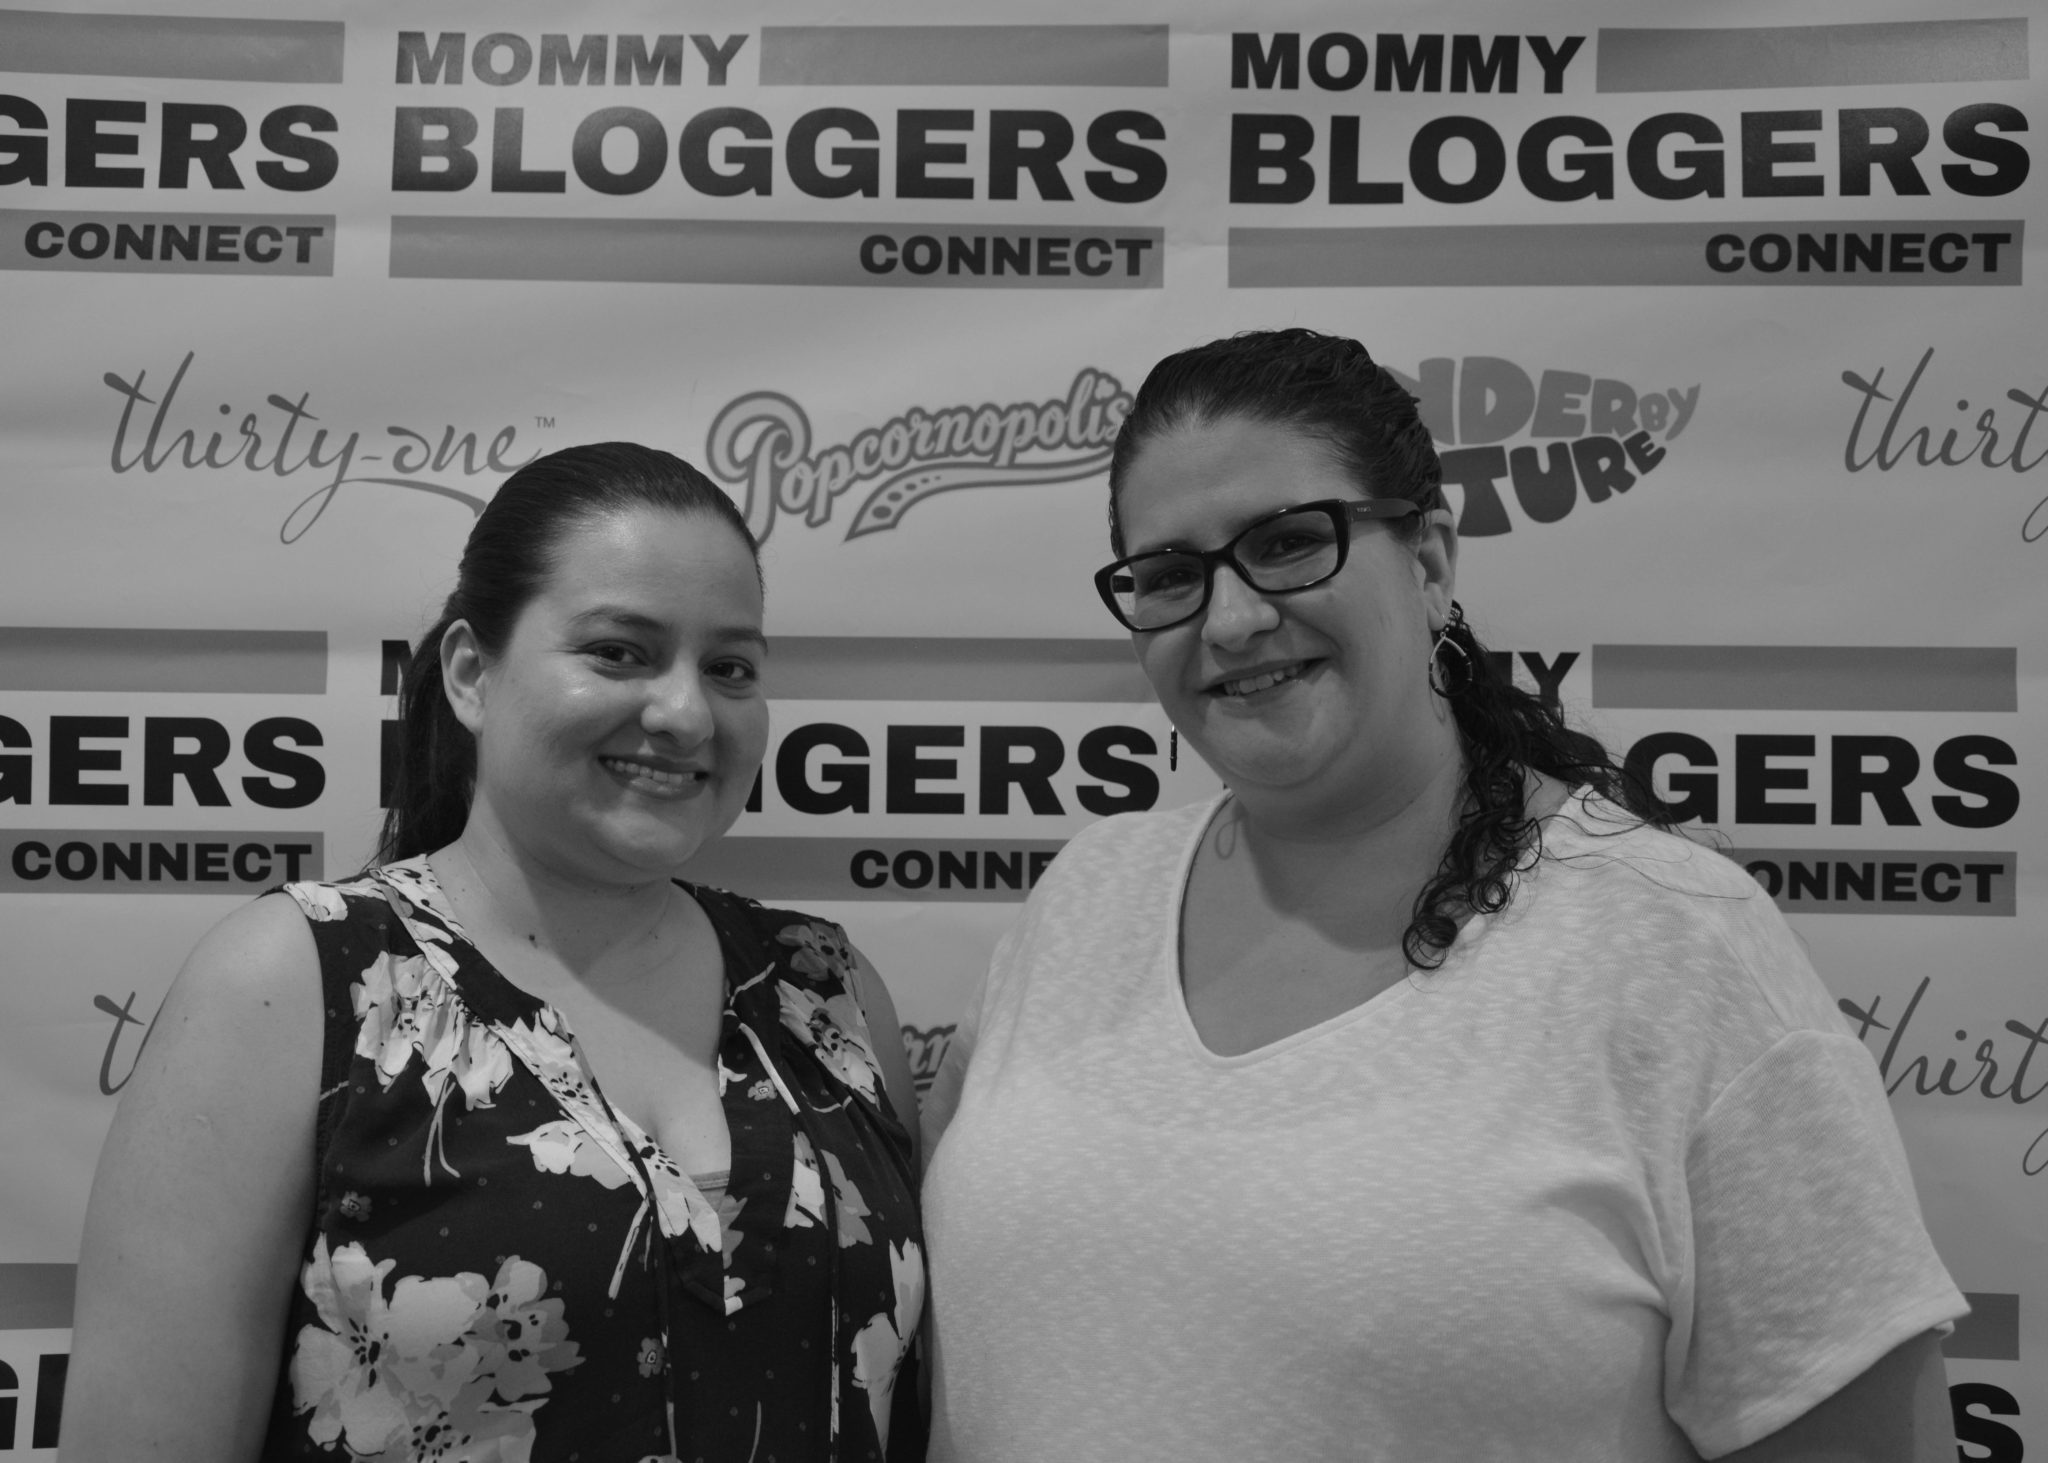 Mommy Bloggers Connect #BloggerNetwork